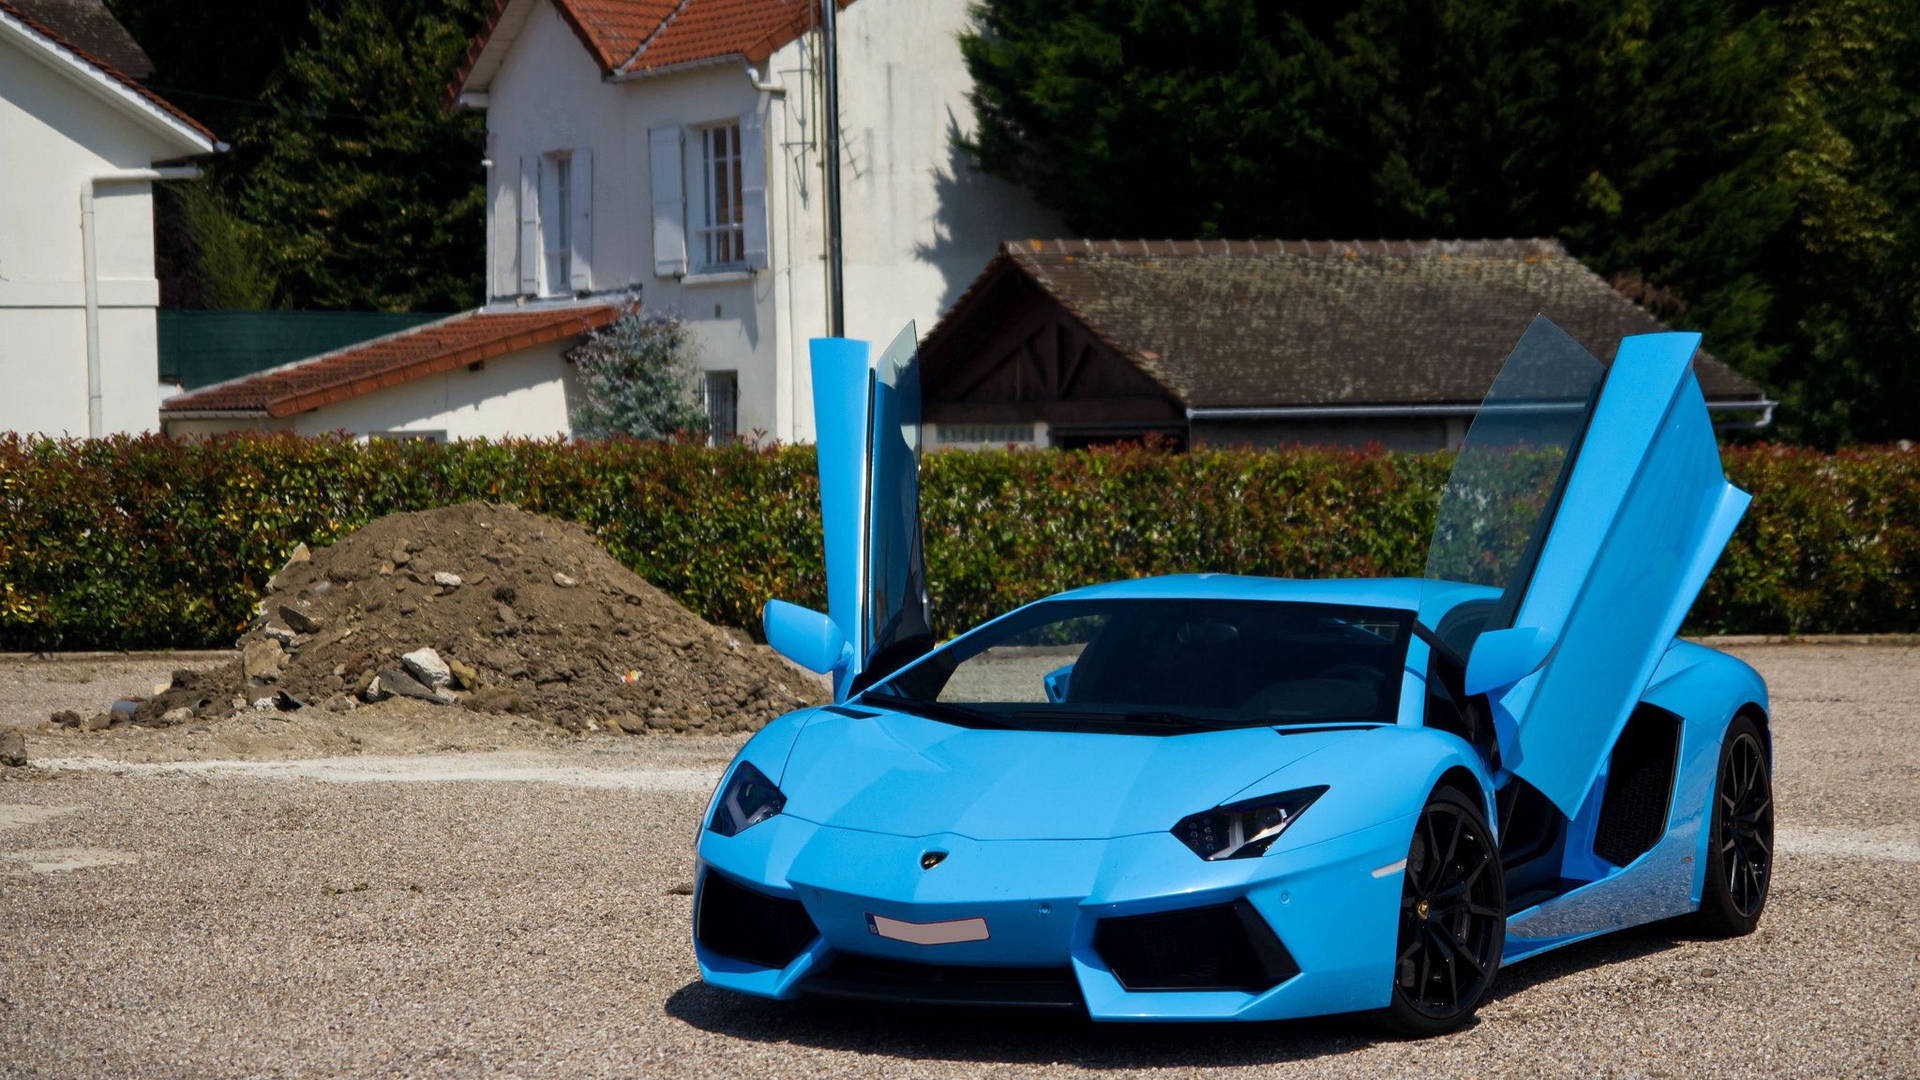 Experience the ultimate thrill of driving a sky blue Lamborghini Aventador Wallpaper